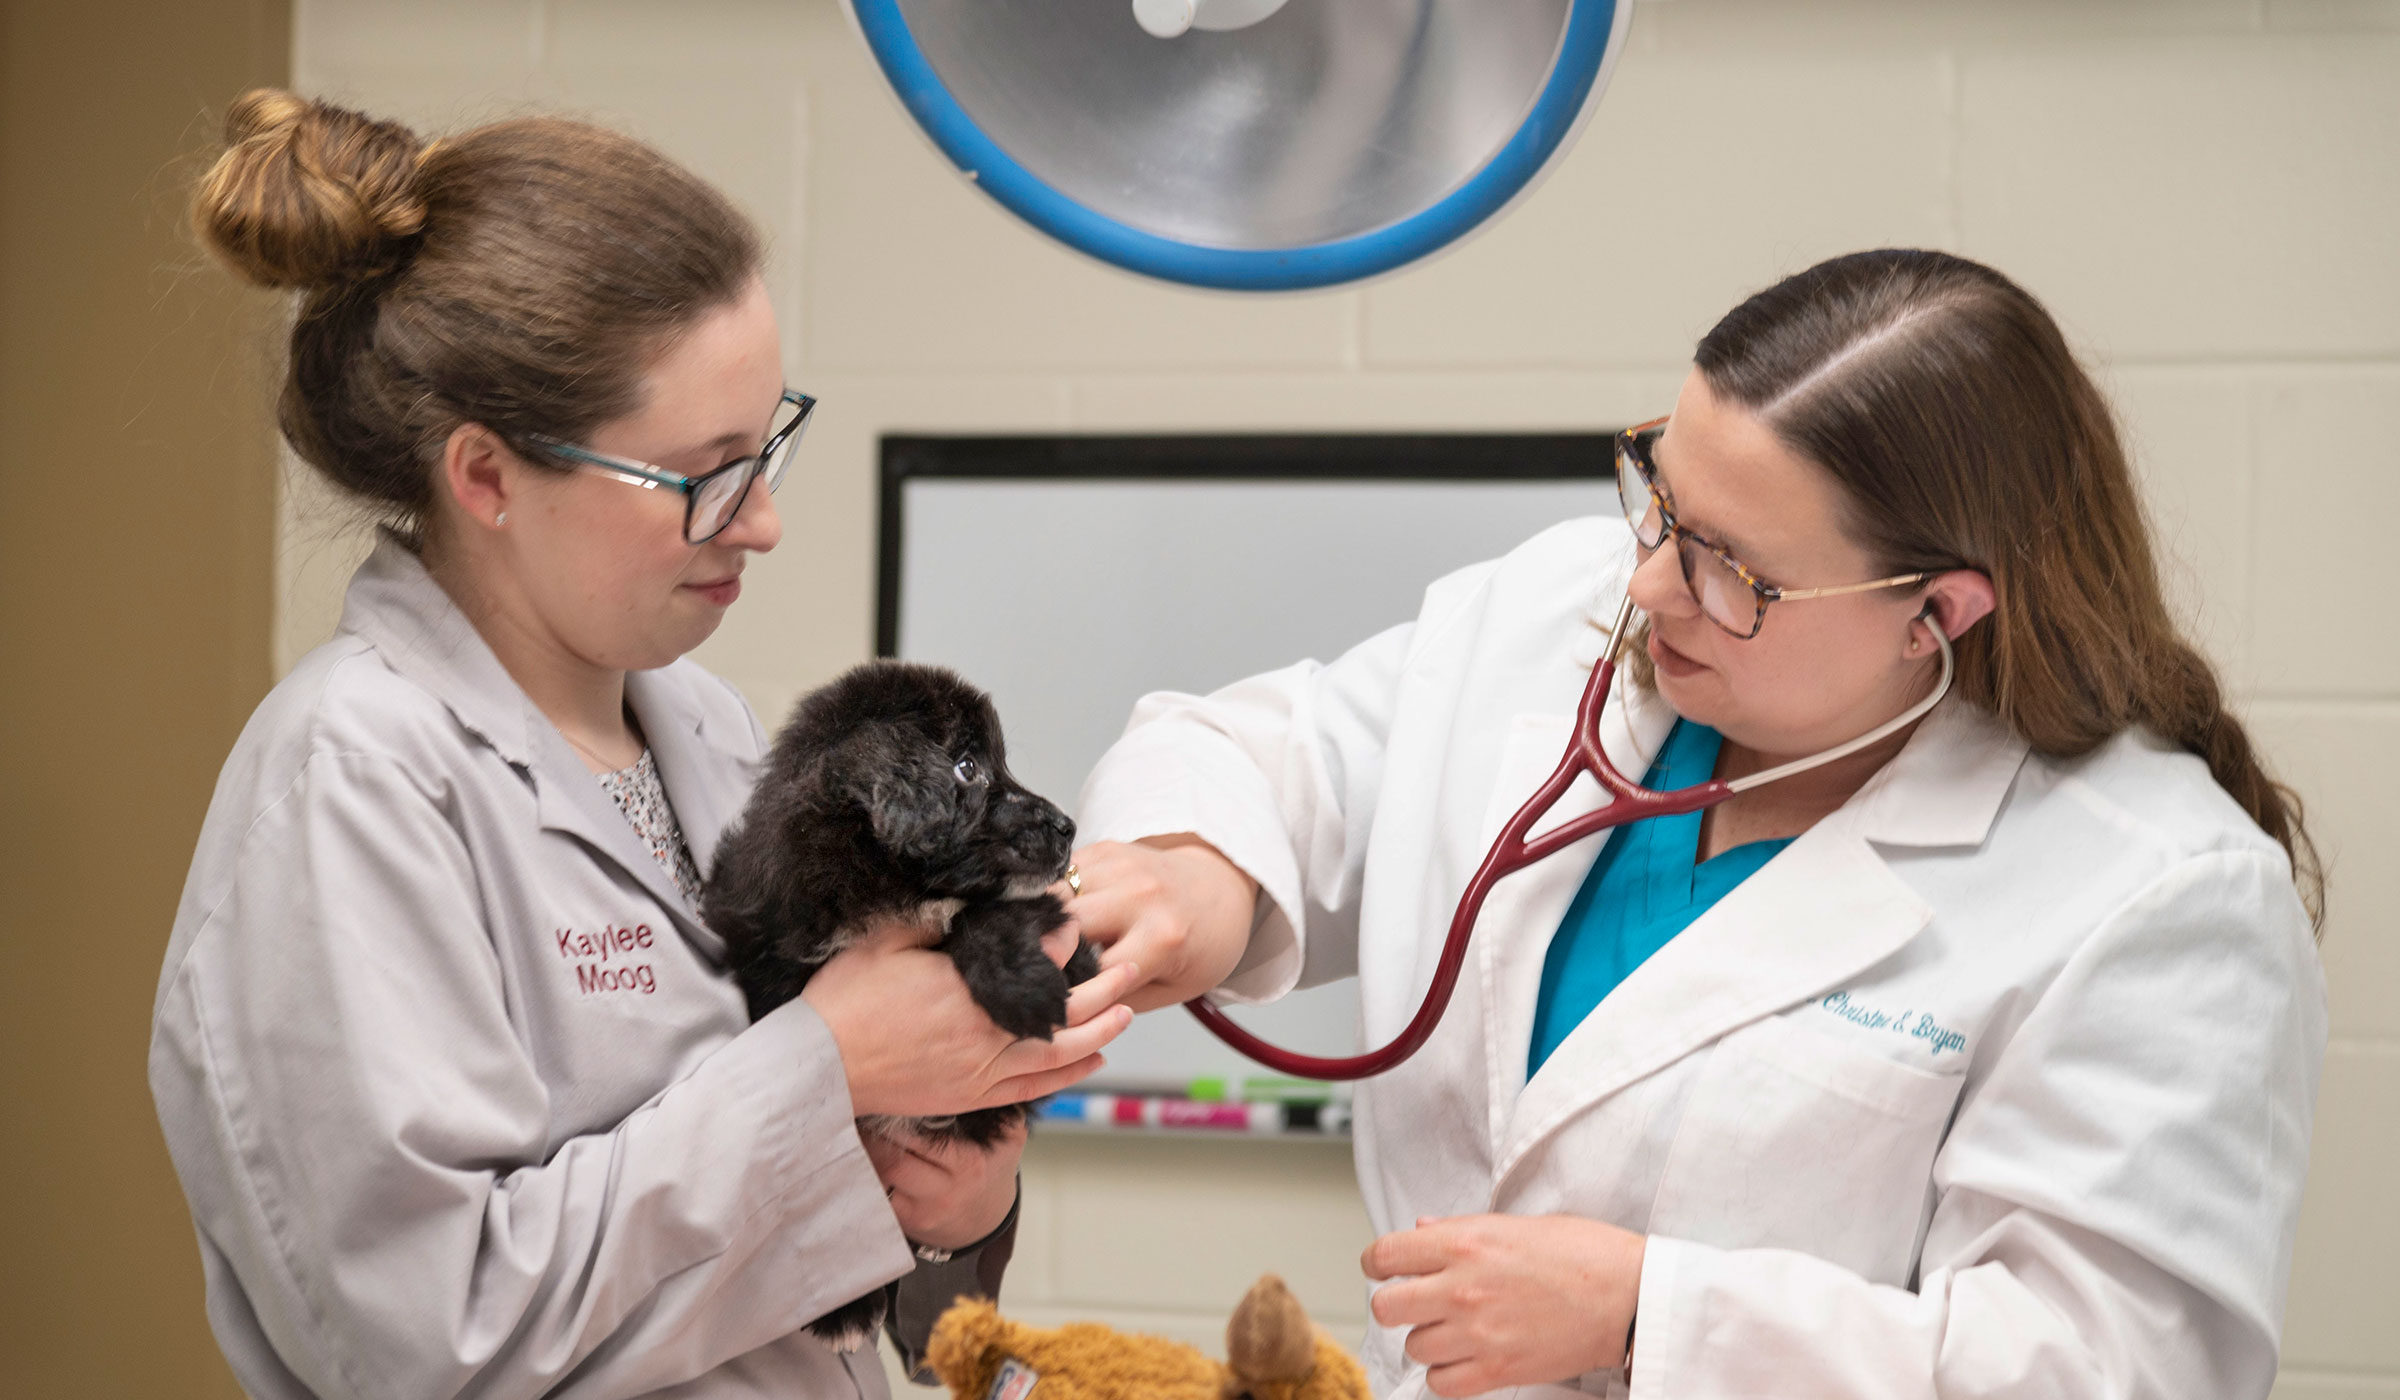 With black puppy held between them, a CVM veterinarian and student hold a stethoscope to the puppy in an exam room.